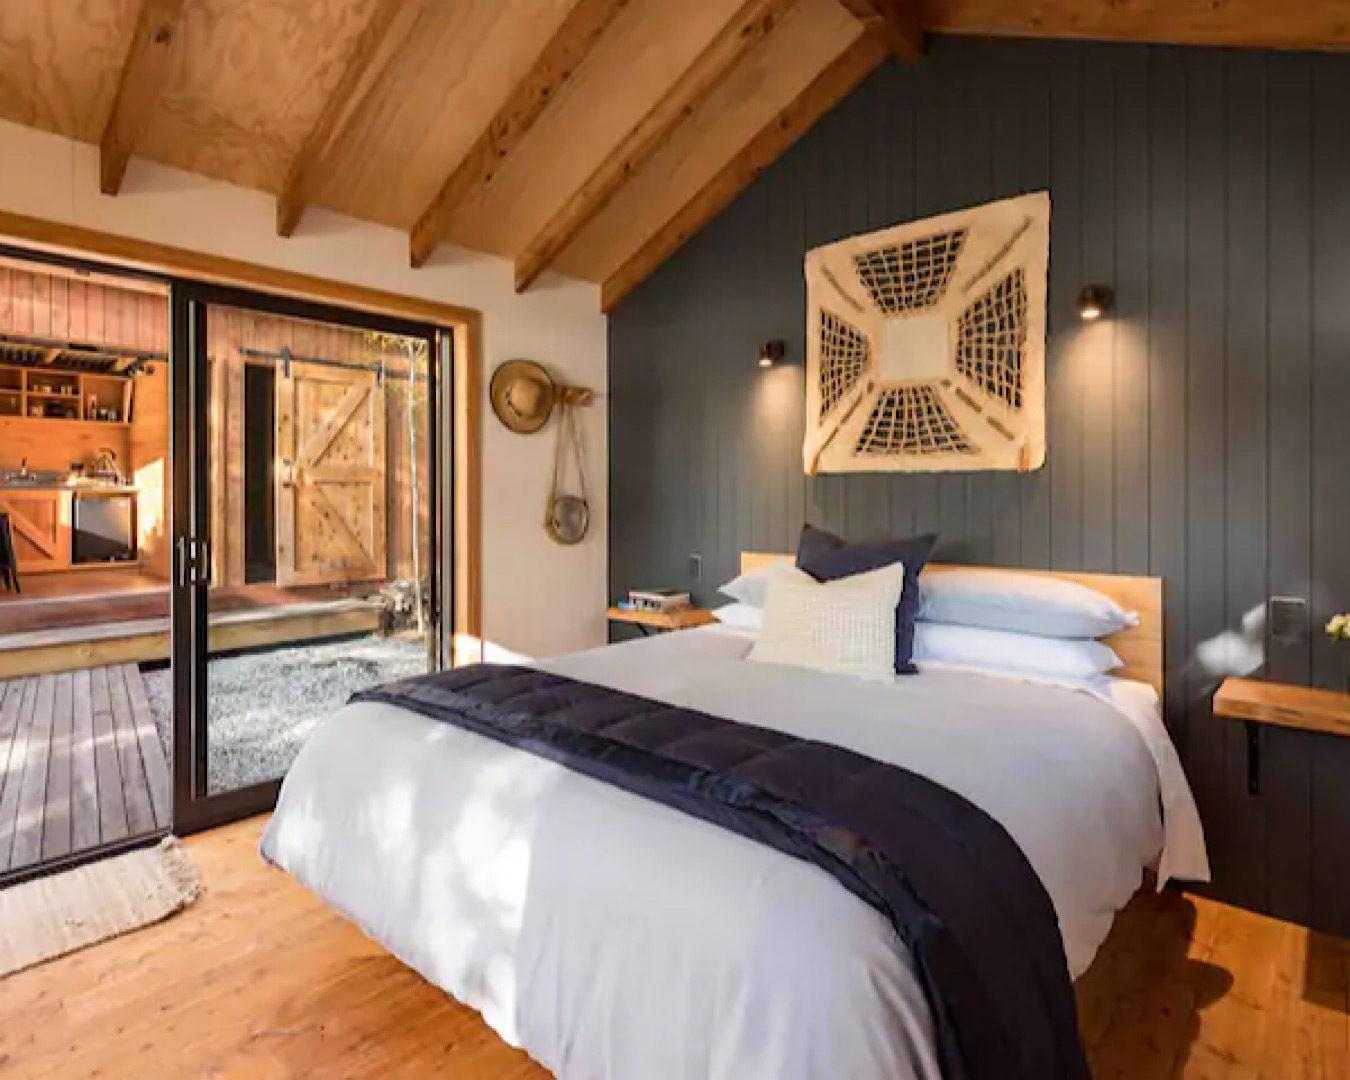 A large, cosy bed sits in a wooden cabin. In the background we see another cabin, housing a kitchen. 